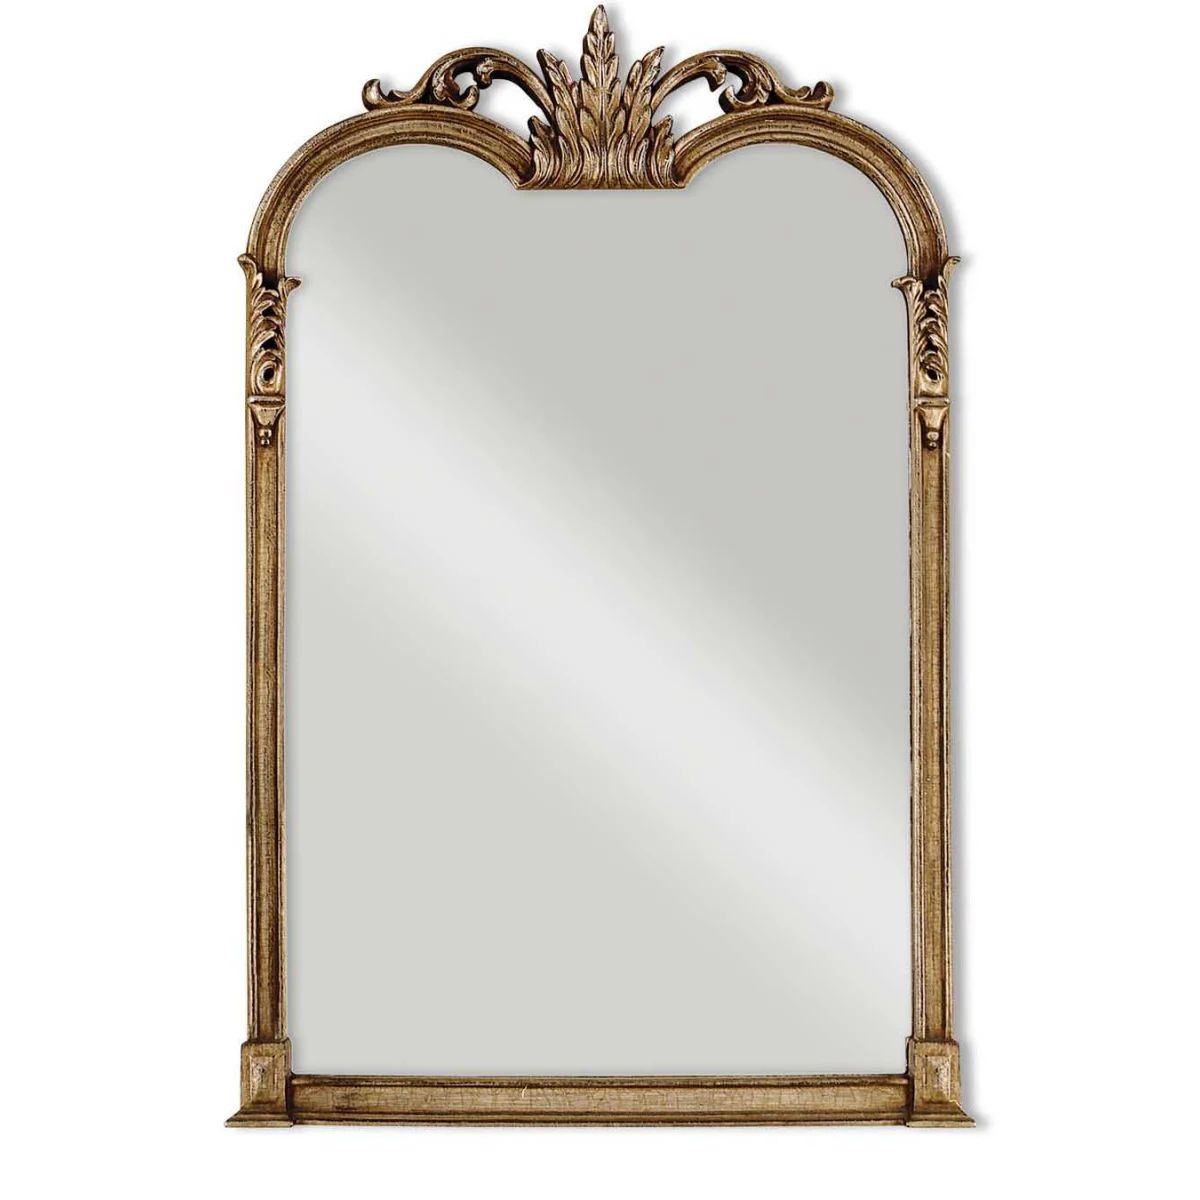 Jacqueline 43X28 Traditional Antiqued Frame Flat Surface Accent Mirror | Build.com, Inc.